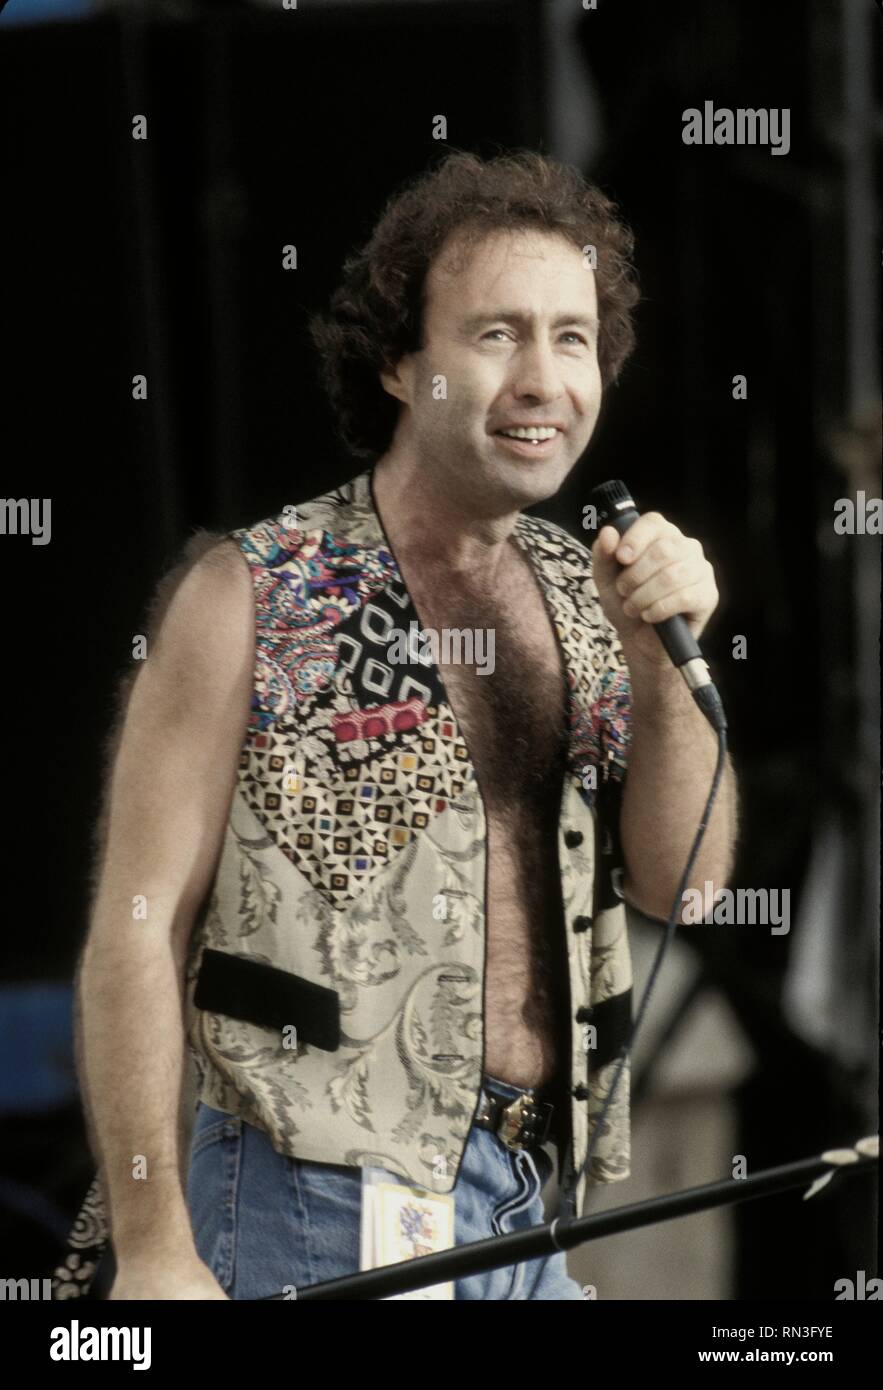 Rock singer and songwriter Paul Rodgers, best known for being a member of Free and Bad Company, is shown performing on stage during Woodstock '94. Stock Photo